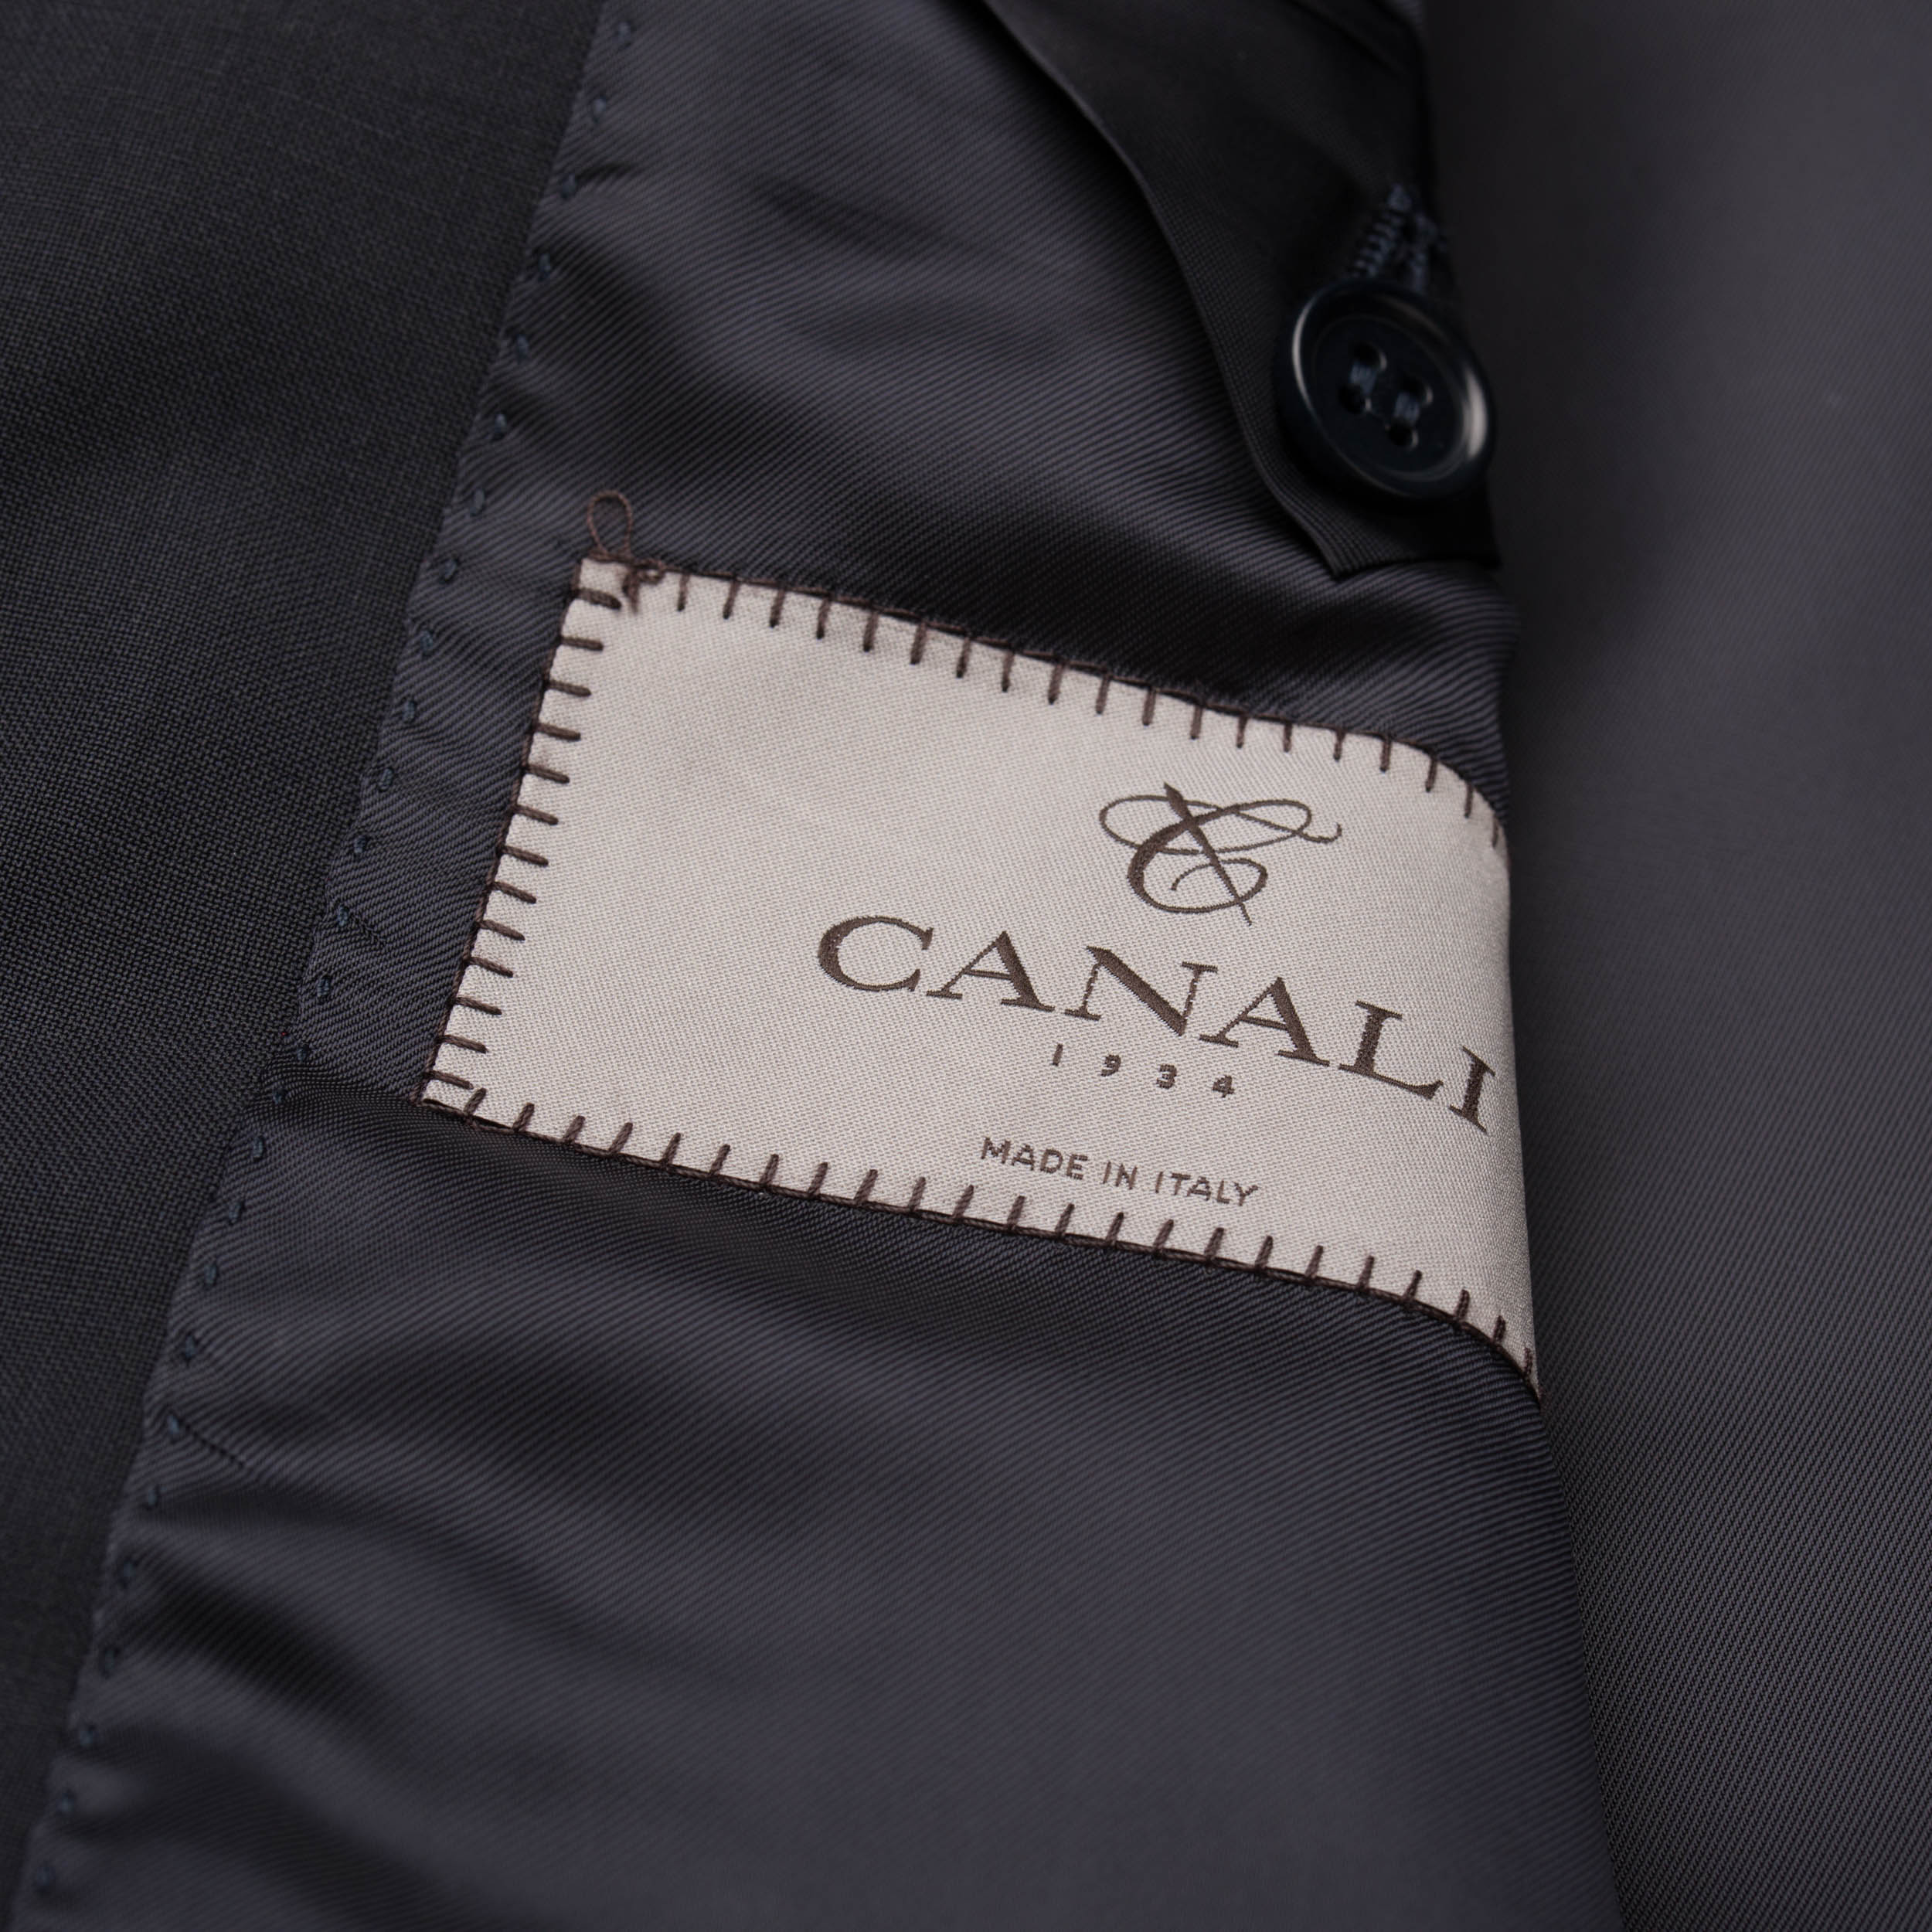 CANALI 1934 "Travel" Gray Wool-Mohair 3 Piece Suit EU 46 NEW US 36 Model CANALI